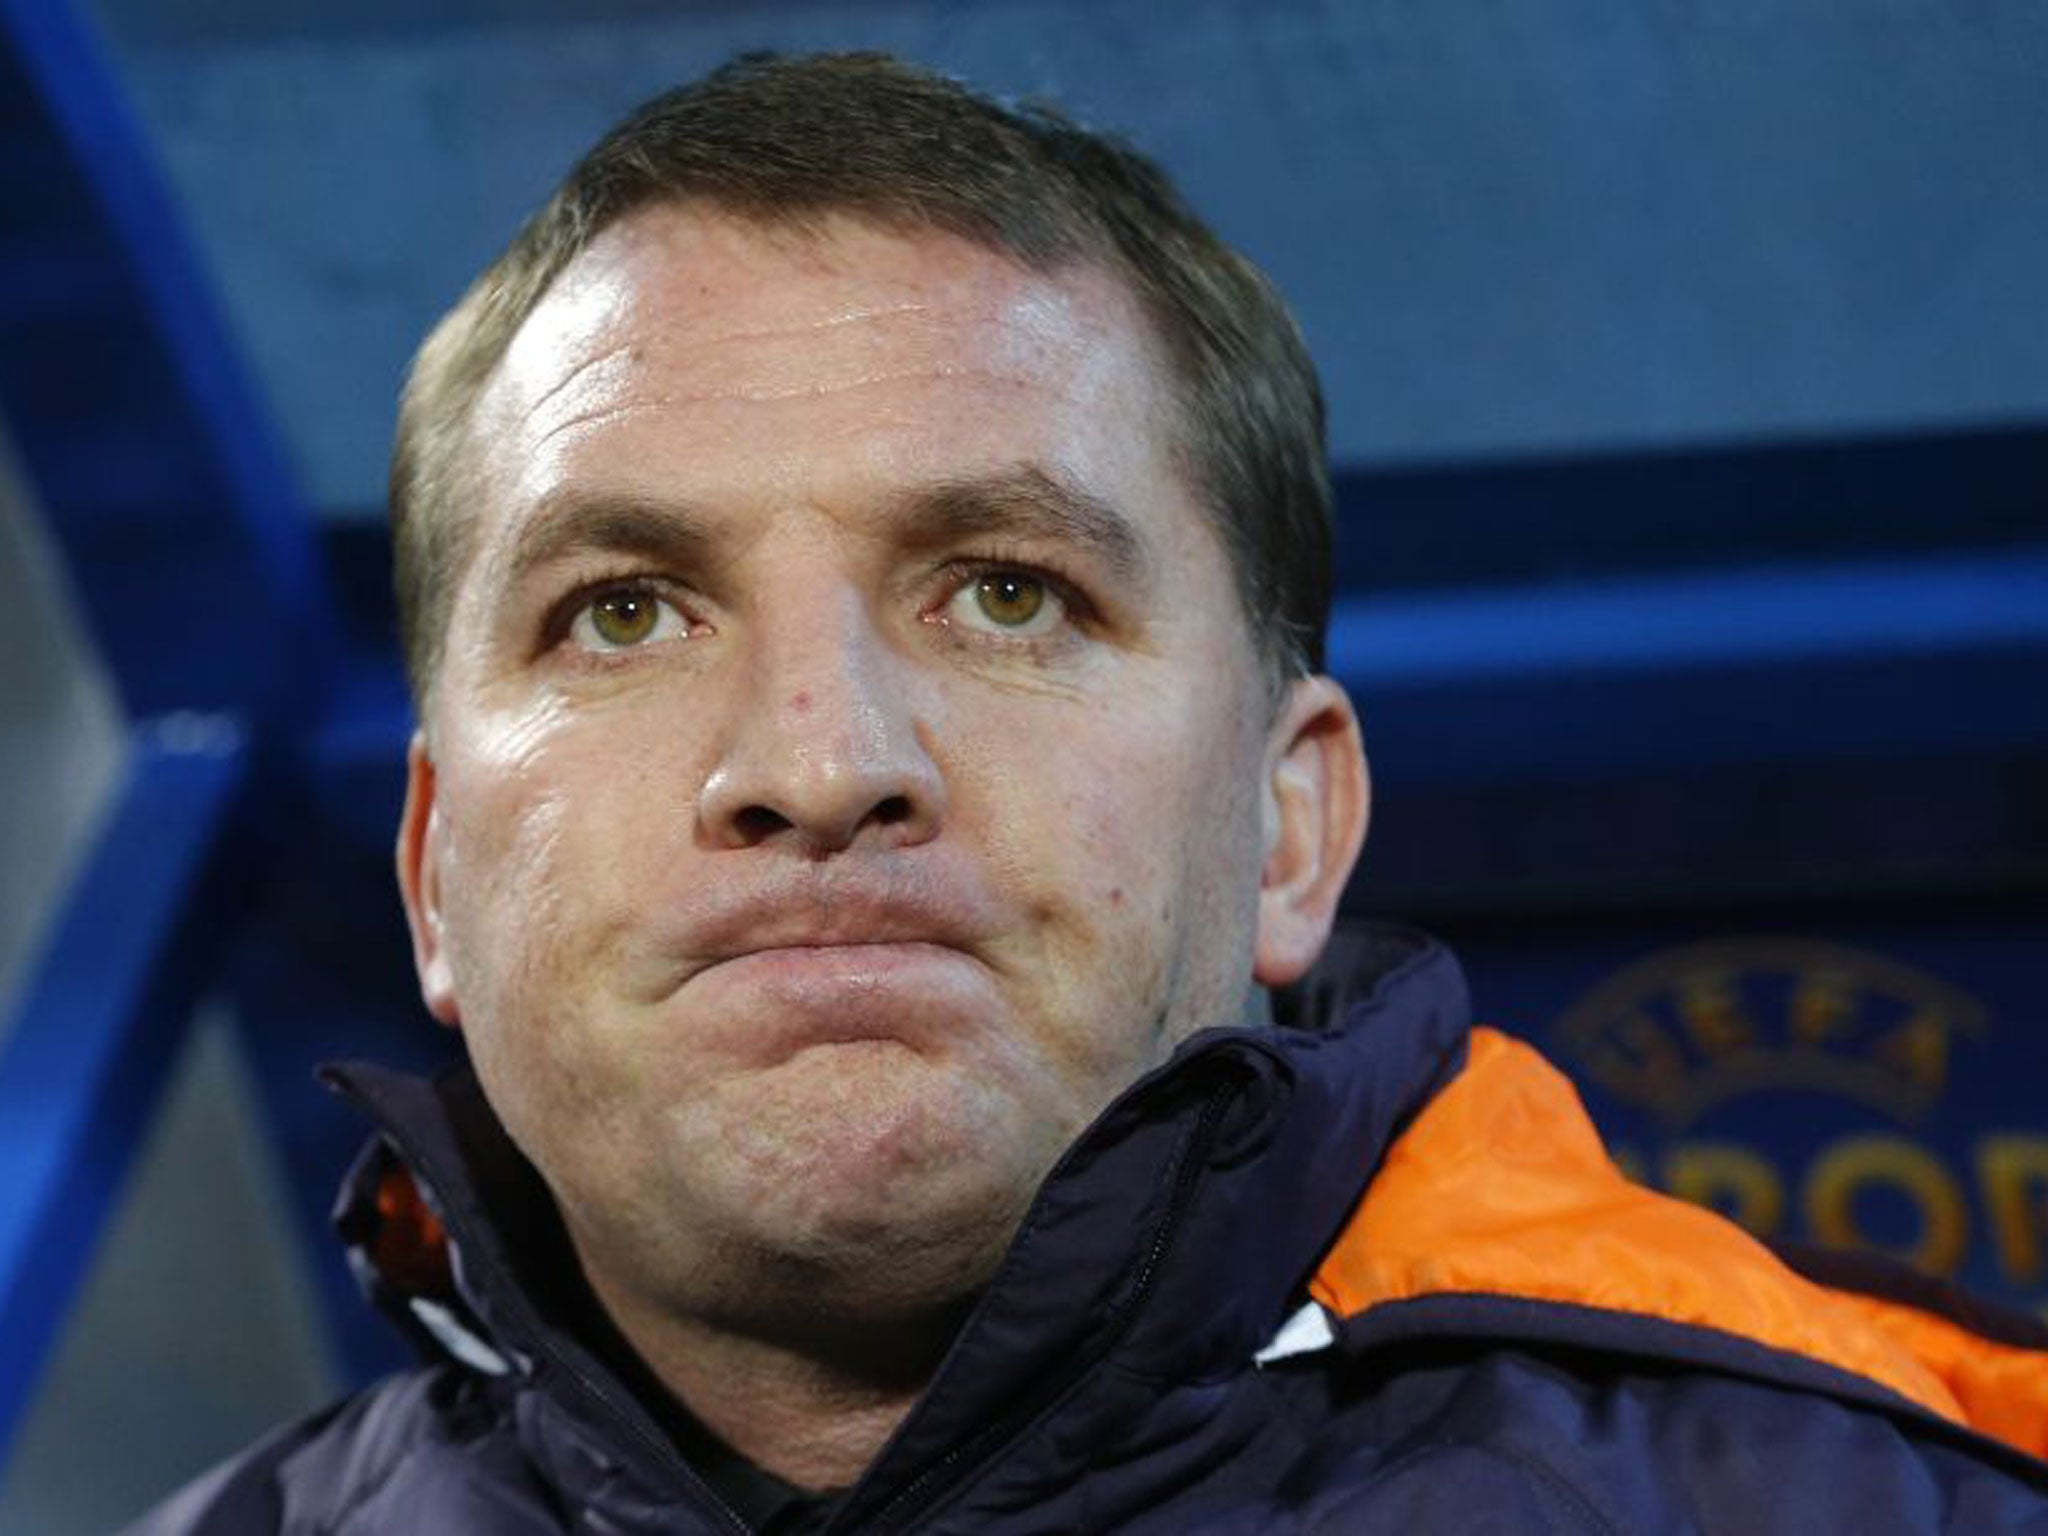 Brendan Rodgers, the Liverpool manager, is not amused